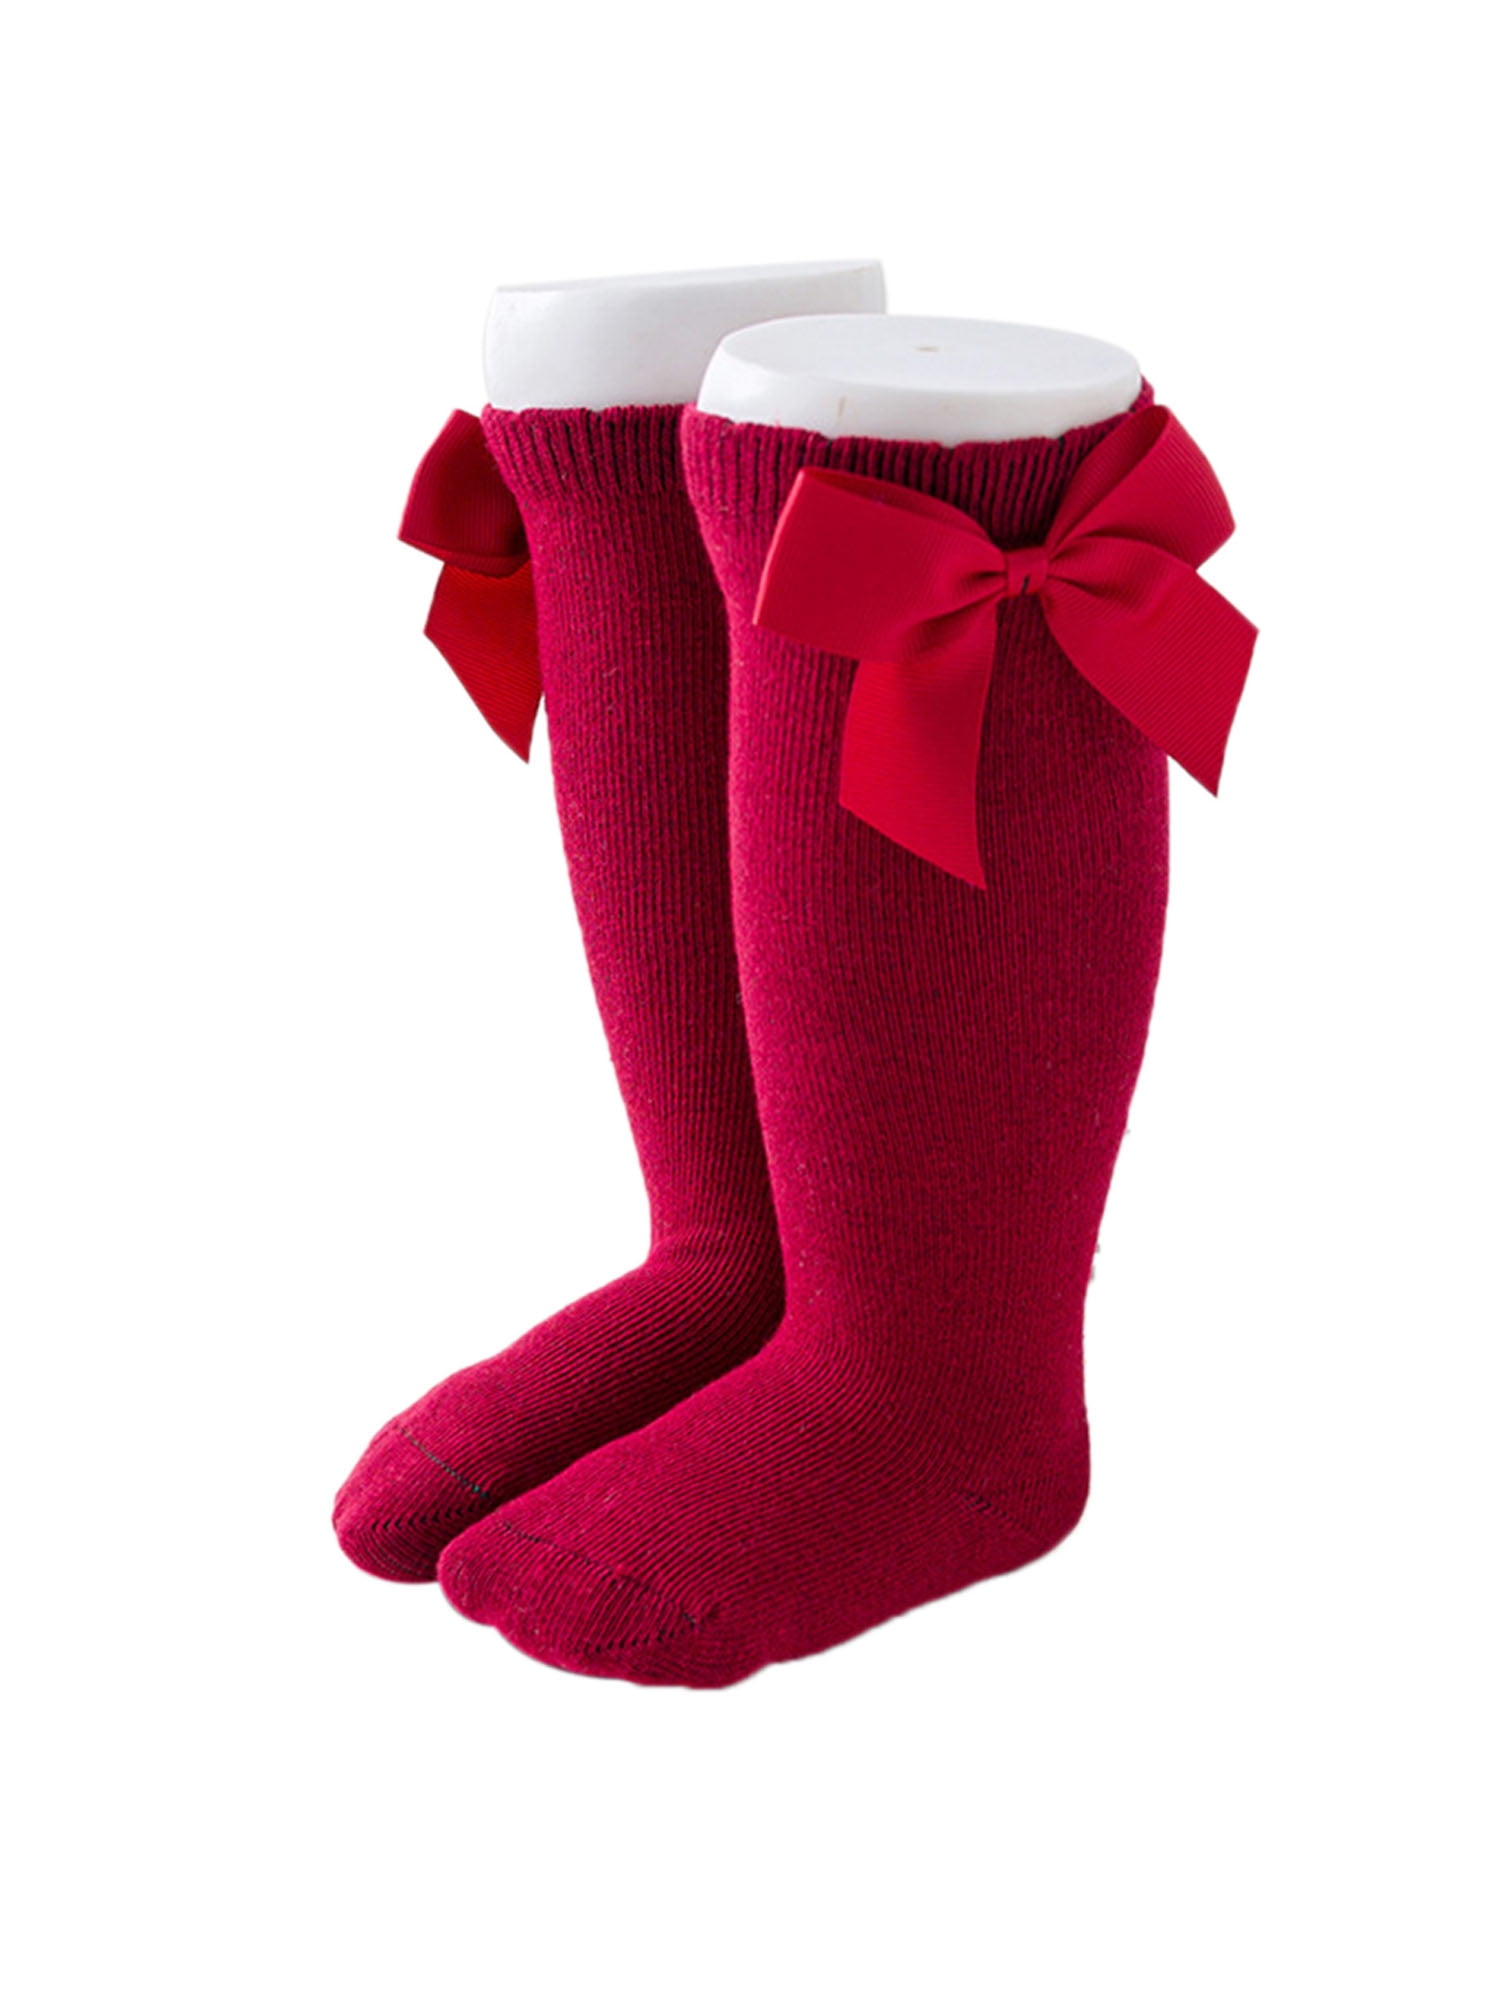 wybzd Knee High Newborn Baby Socks Toddler Infant Boys Girls Lace Bow Tube  Tights Long Socks Solid Color Stockings Wine red 3-5 Years 